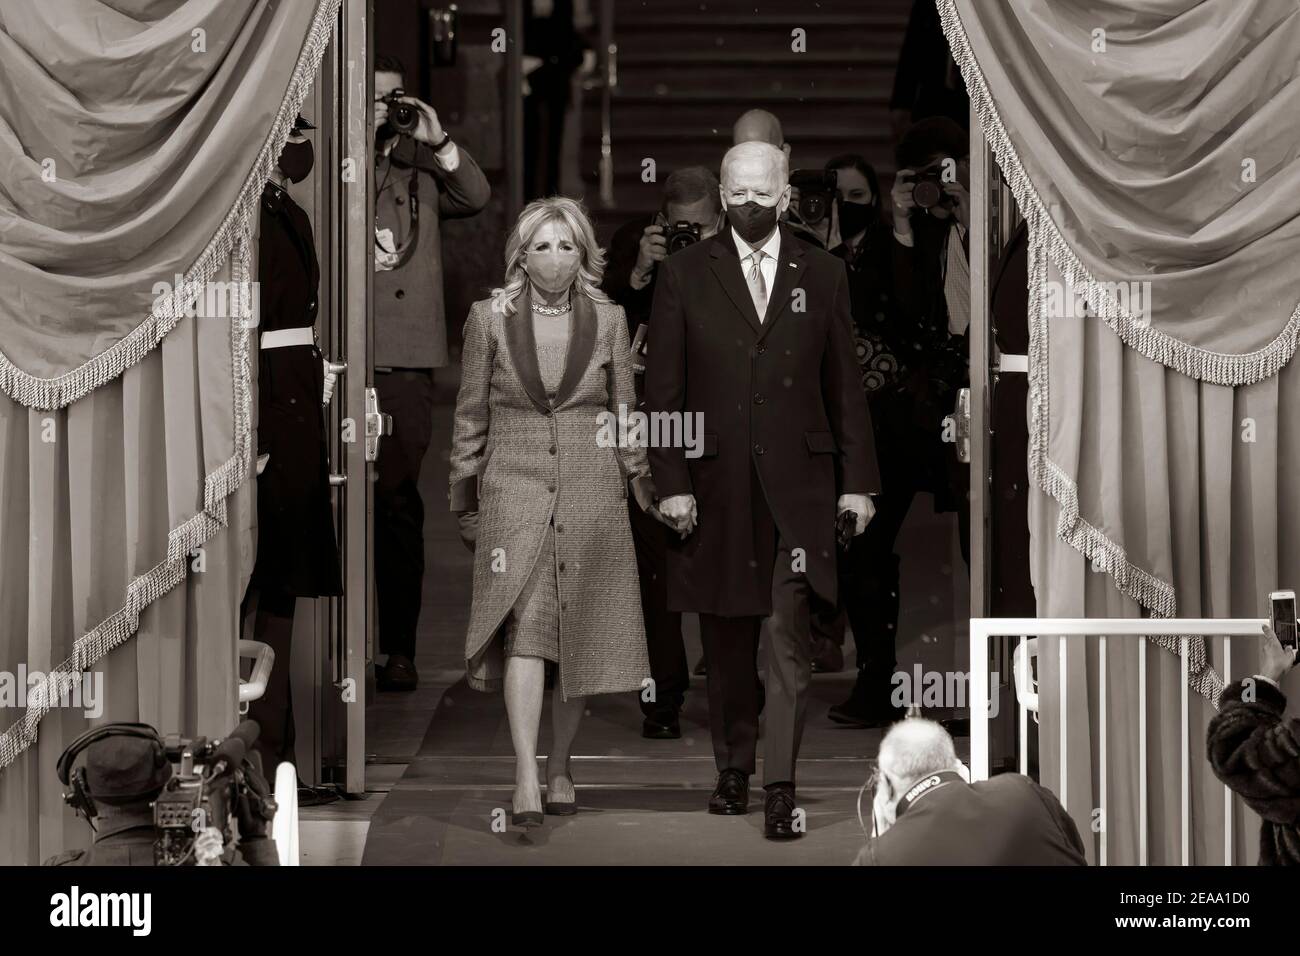 President-elect Joe Biden and Dr. Jill Biden arrive to the inaugural platform Wednesday, Jan. 20, 2021, for the 59th Presidential Inauguration at the U.S. Capitol in Washington, D.C. (Official White House Photo by Chuck Kennedy) Stock Photo